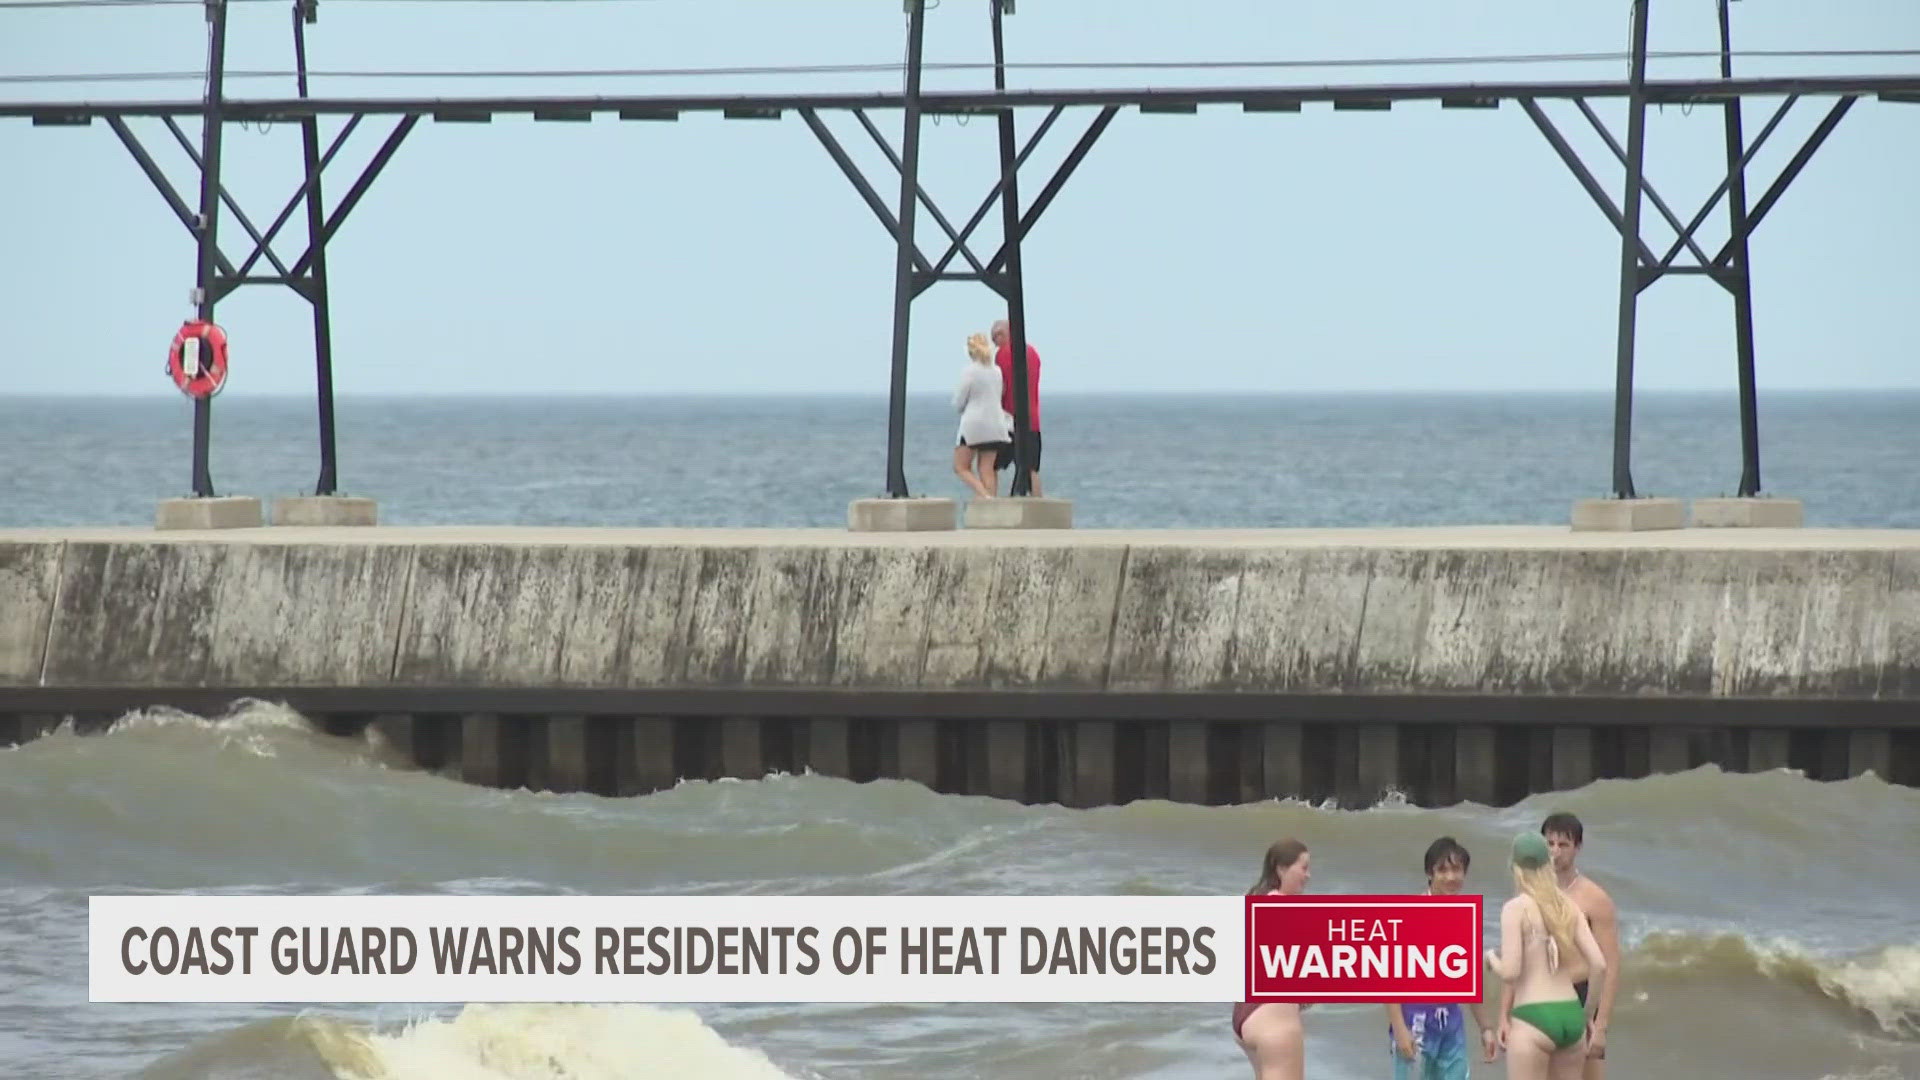 With high temperatures expected throughout the week, the Coast Guard is warning residents of the dangers of heat, especially in water.